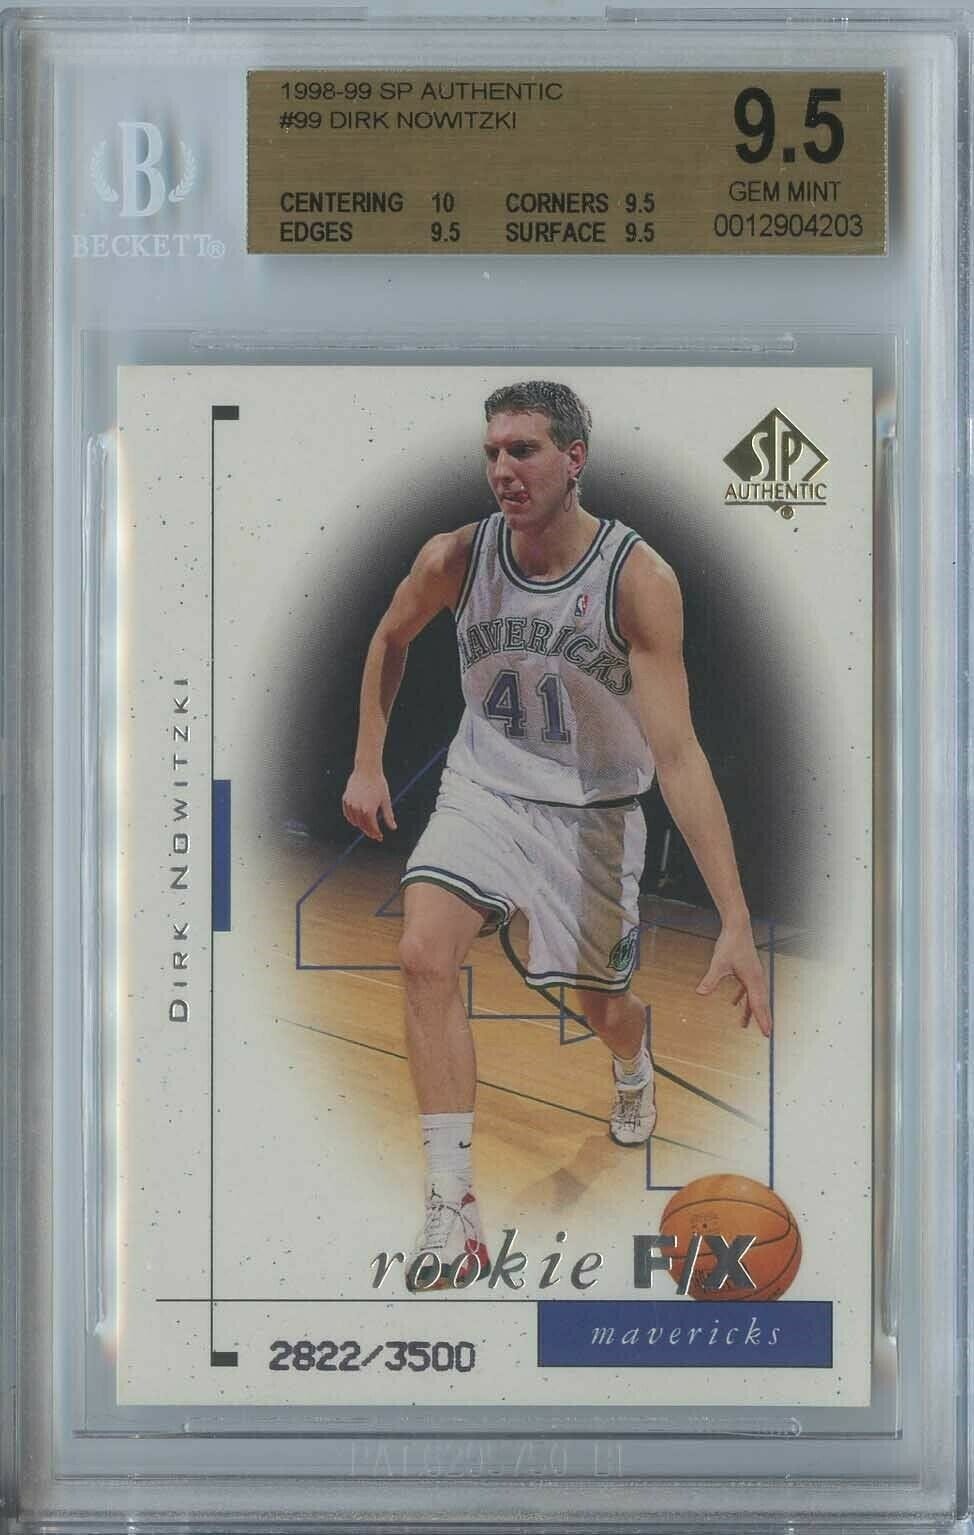 Image 1 - Dirk Nowitzki 1998 99 SP Authentic Basketball #99 RC Rookie 2822/3500 BGS 9.5